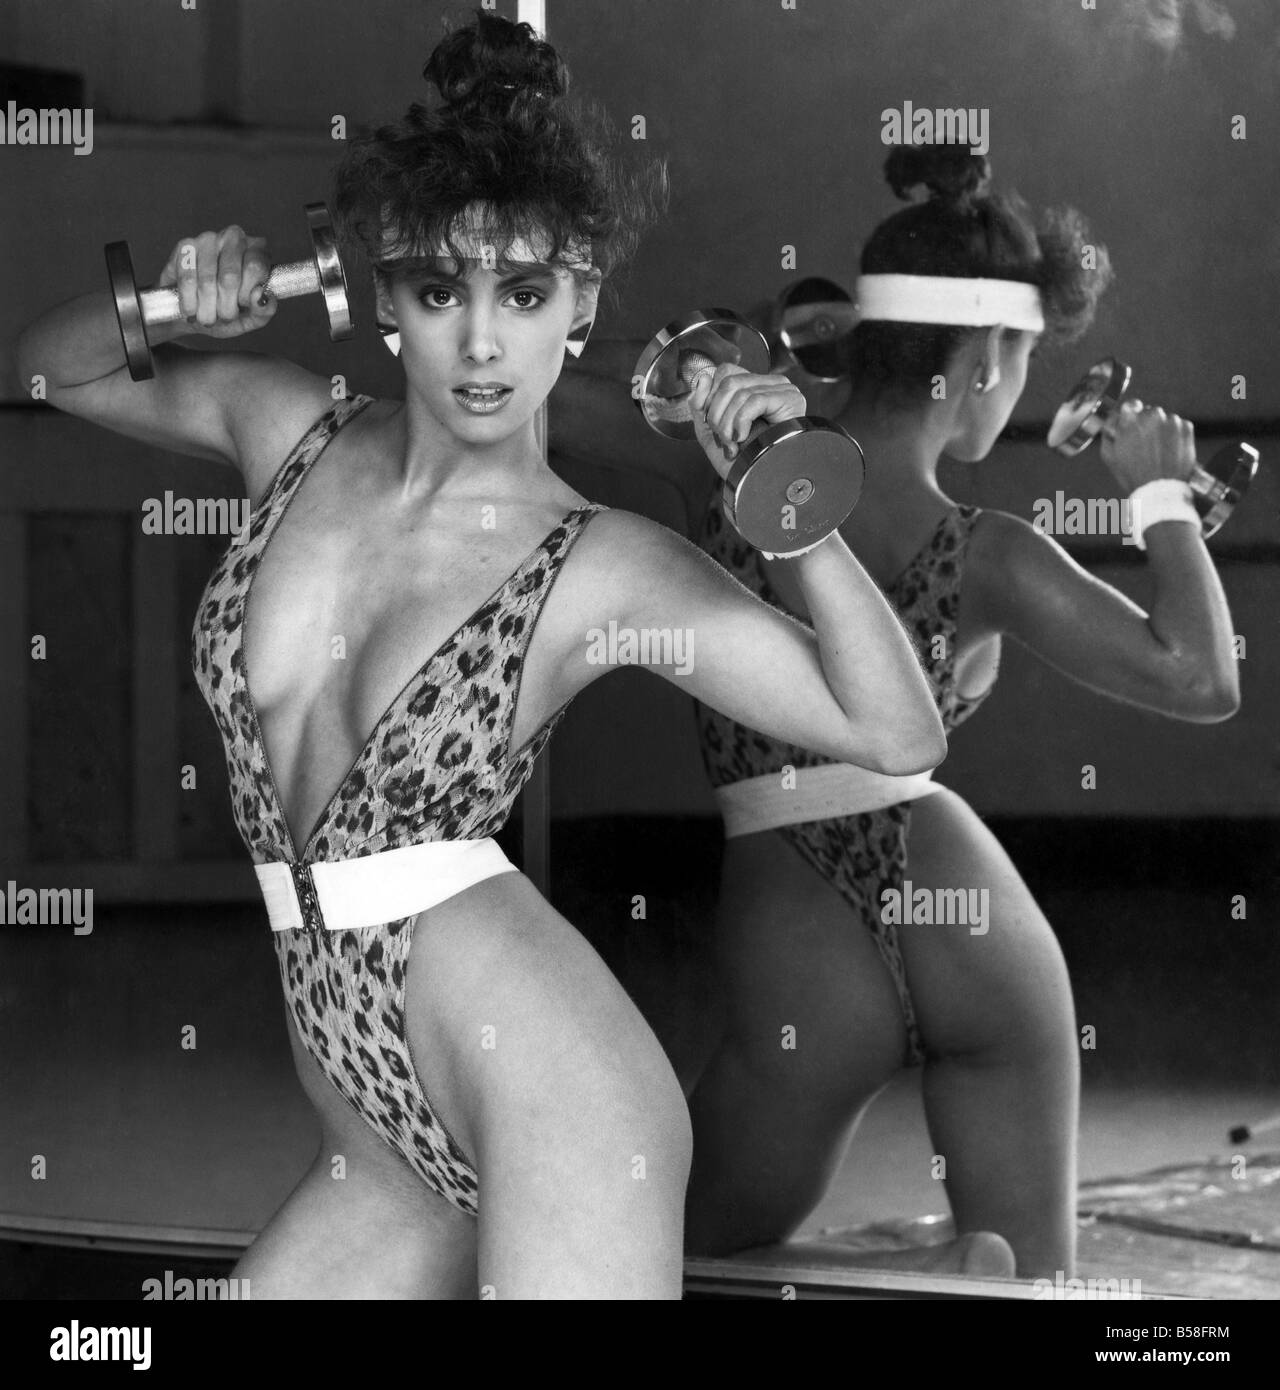 Leotard 1980s Black and White Stock Photos & Images - Alamy